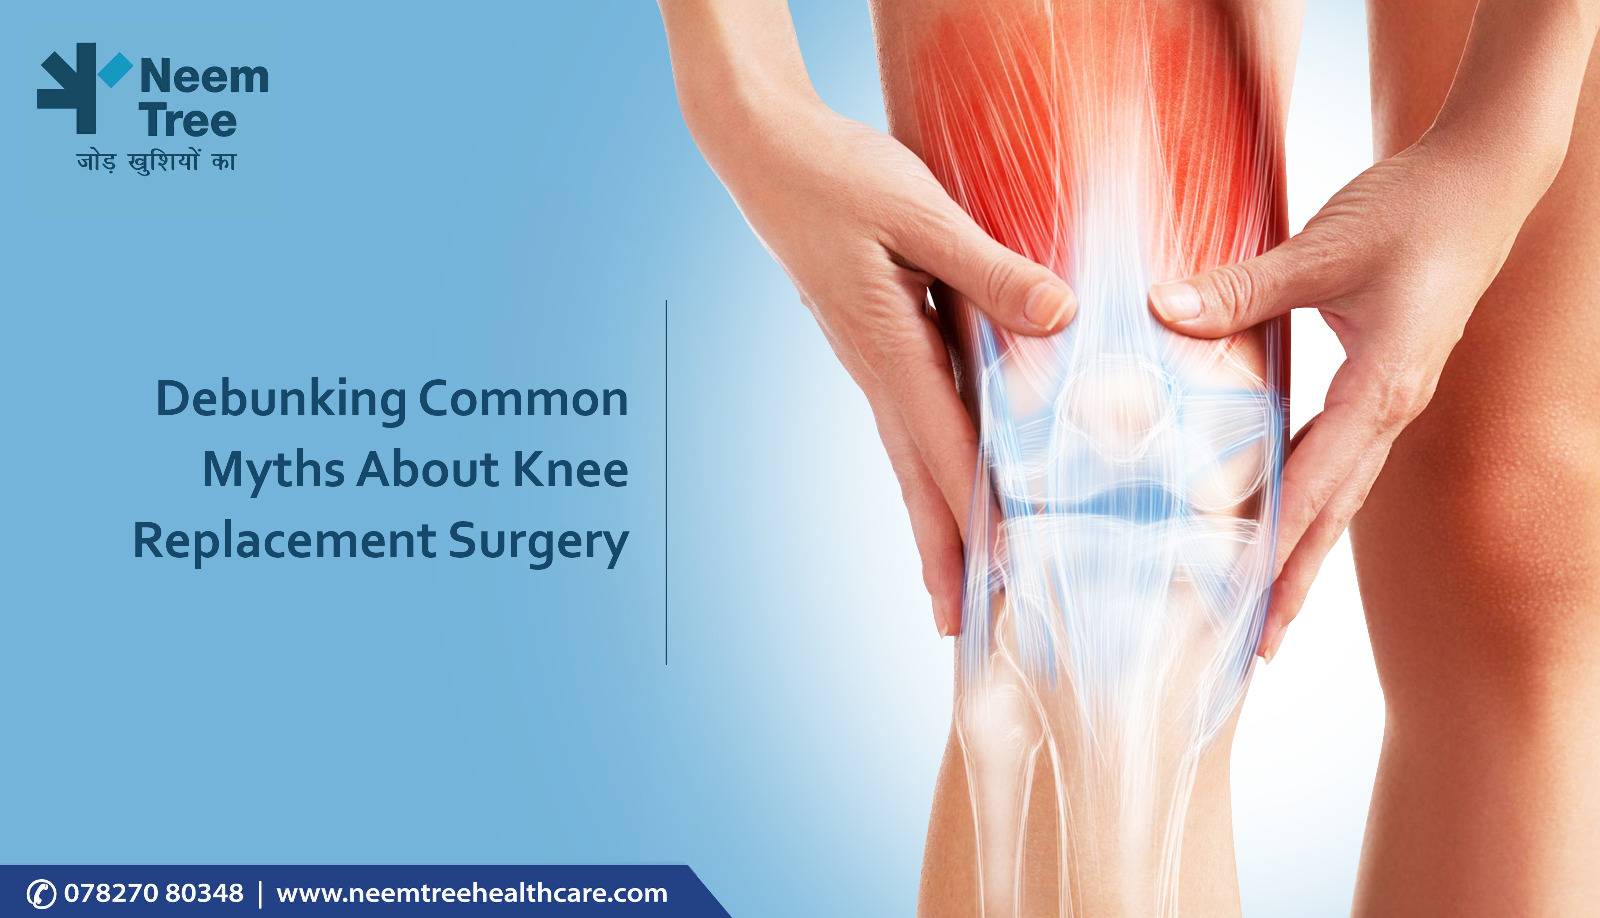 Debunking common myths about Knee Replacement Surgery